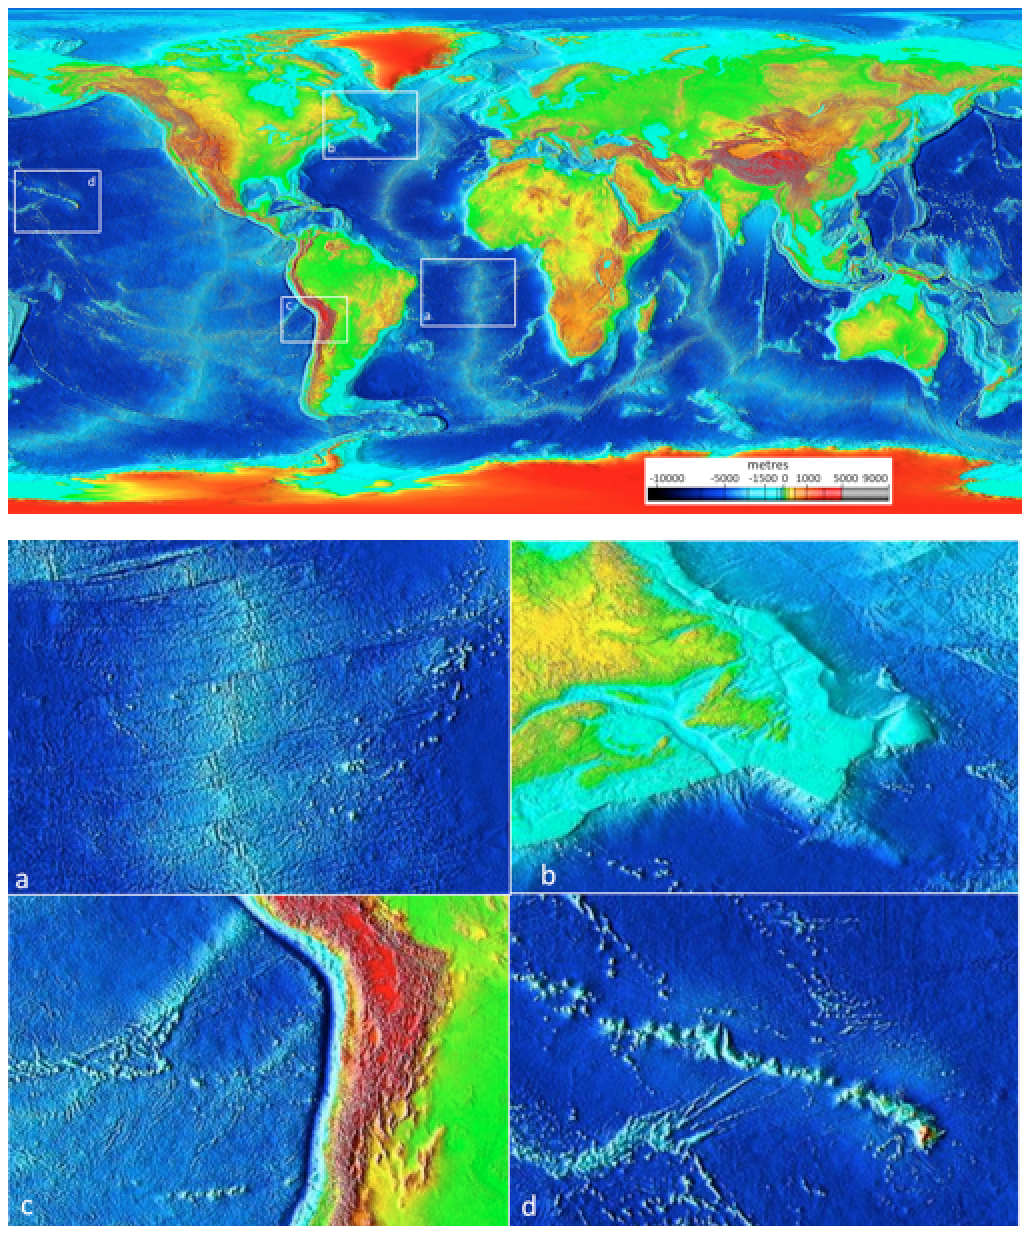 Bathymetric images showing the features that can be recognized on the ocean floor. Darker colors refer to deeper sections, whereas lighter colors refer to sections that are higher elevation in the ocean. Inset "a" shows how the mid Atlantic Ridge is higher than the surrounding seafloor. Inset "b" shows how the continental shelf where Newfoundland borders the Atlantic Ocean is a zone that has a steep change in seafloor elevation where near to Newfoundland water is shallow, but not far off its coast, it becomes deep off the shelf. Inset "c" is the Nazca trench subduction zone where seafloor level becomes very deep preceding South America east of it. Inset "d" is the Hawaiian Island chain of islands, which stand up out of the deep ocean around the islands.